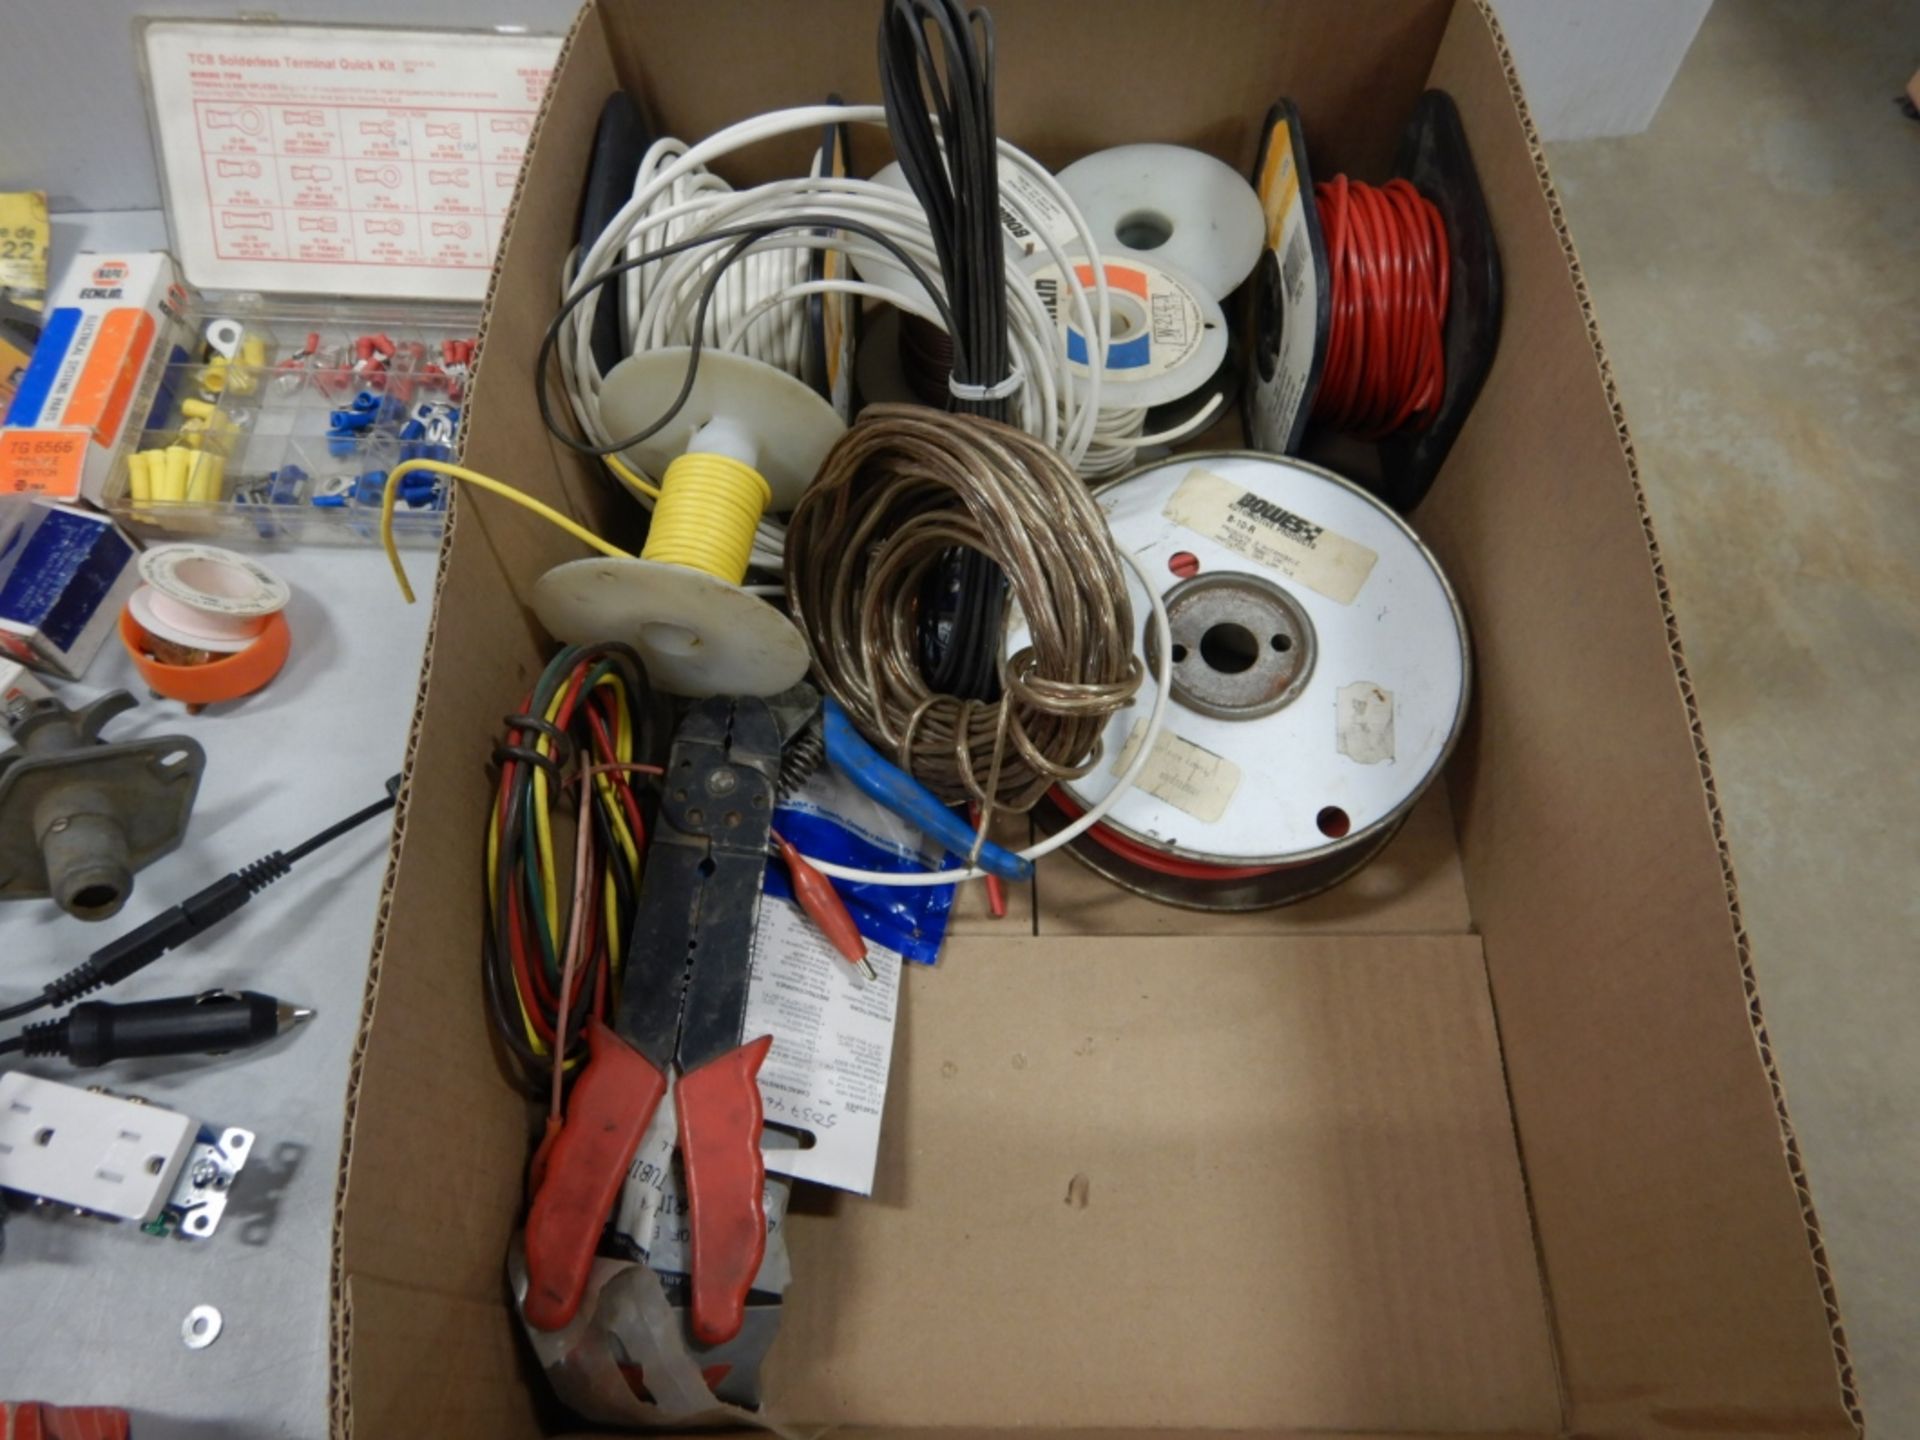 L/O ASSORTED AUTOMOTIVE SWITCHES, BREAKERS, SWITCH CONSOLE, ELEC. CONNECTORS, WIRING, ETC. - Image 5 of 5